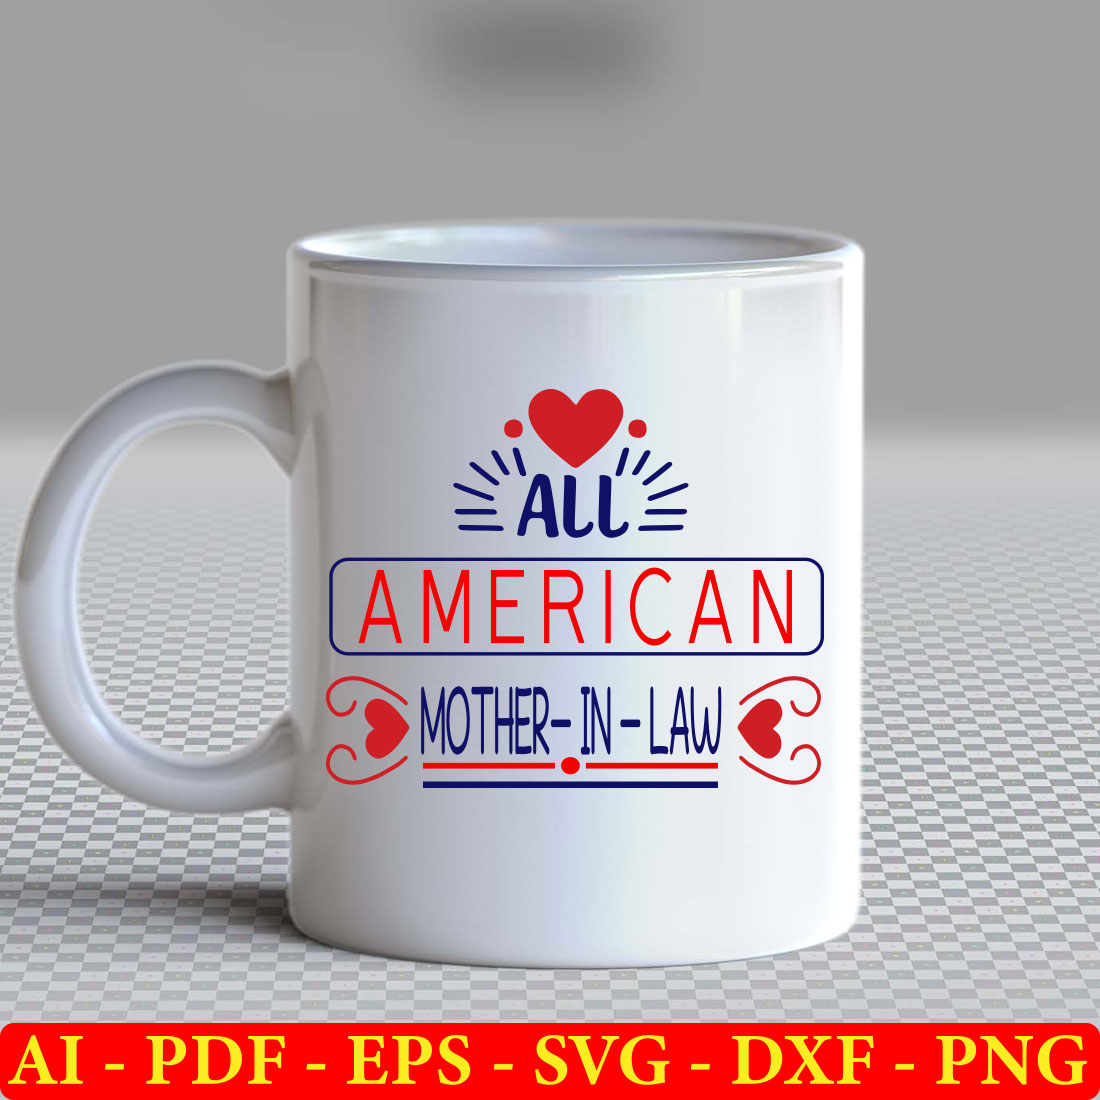 White coffee mug with an american mother in law design.